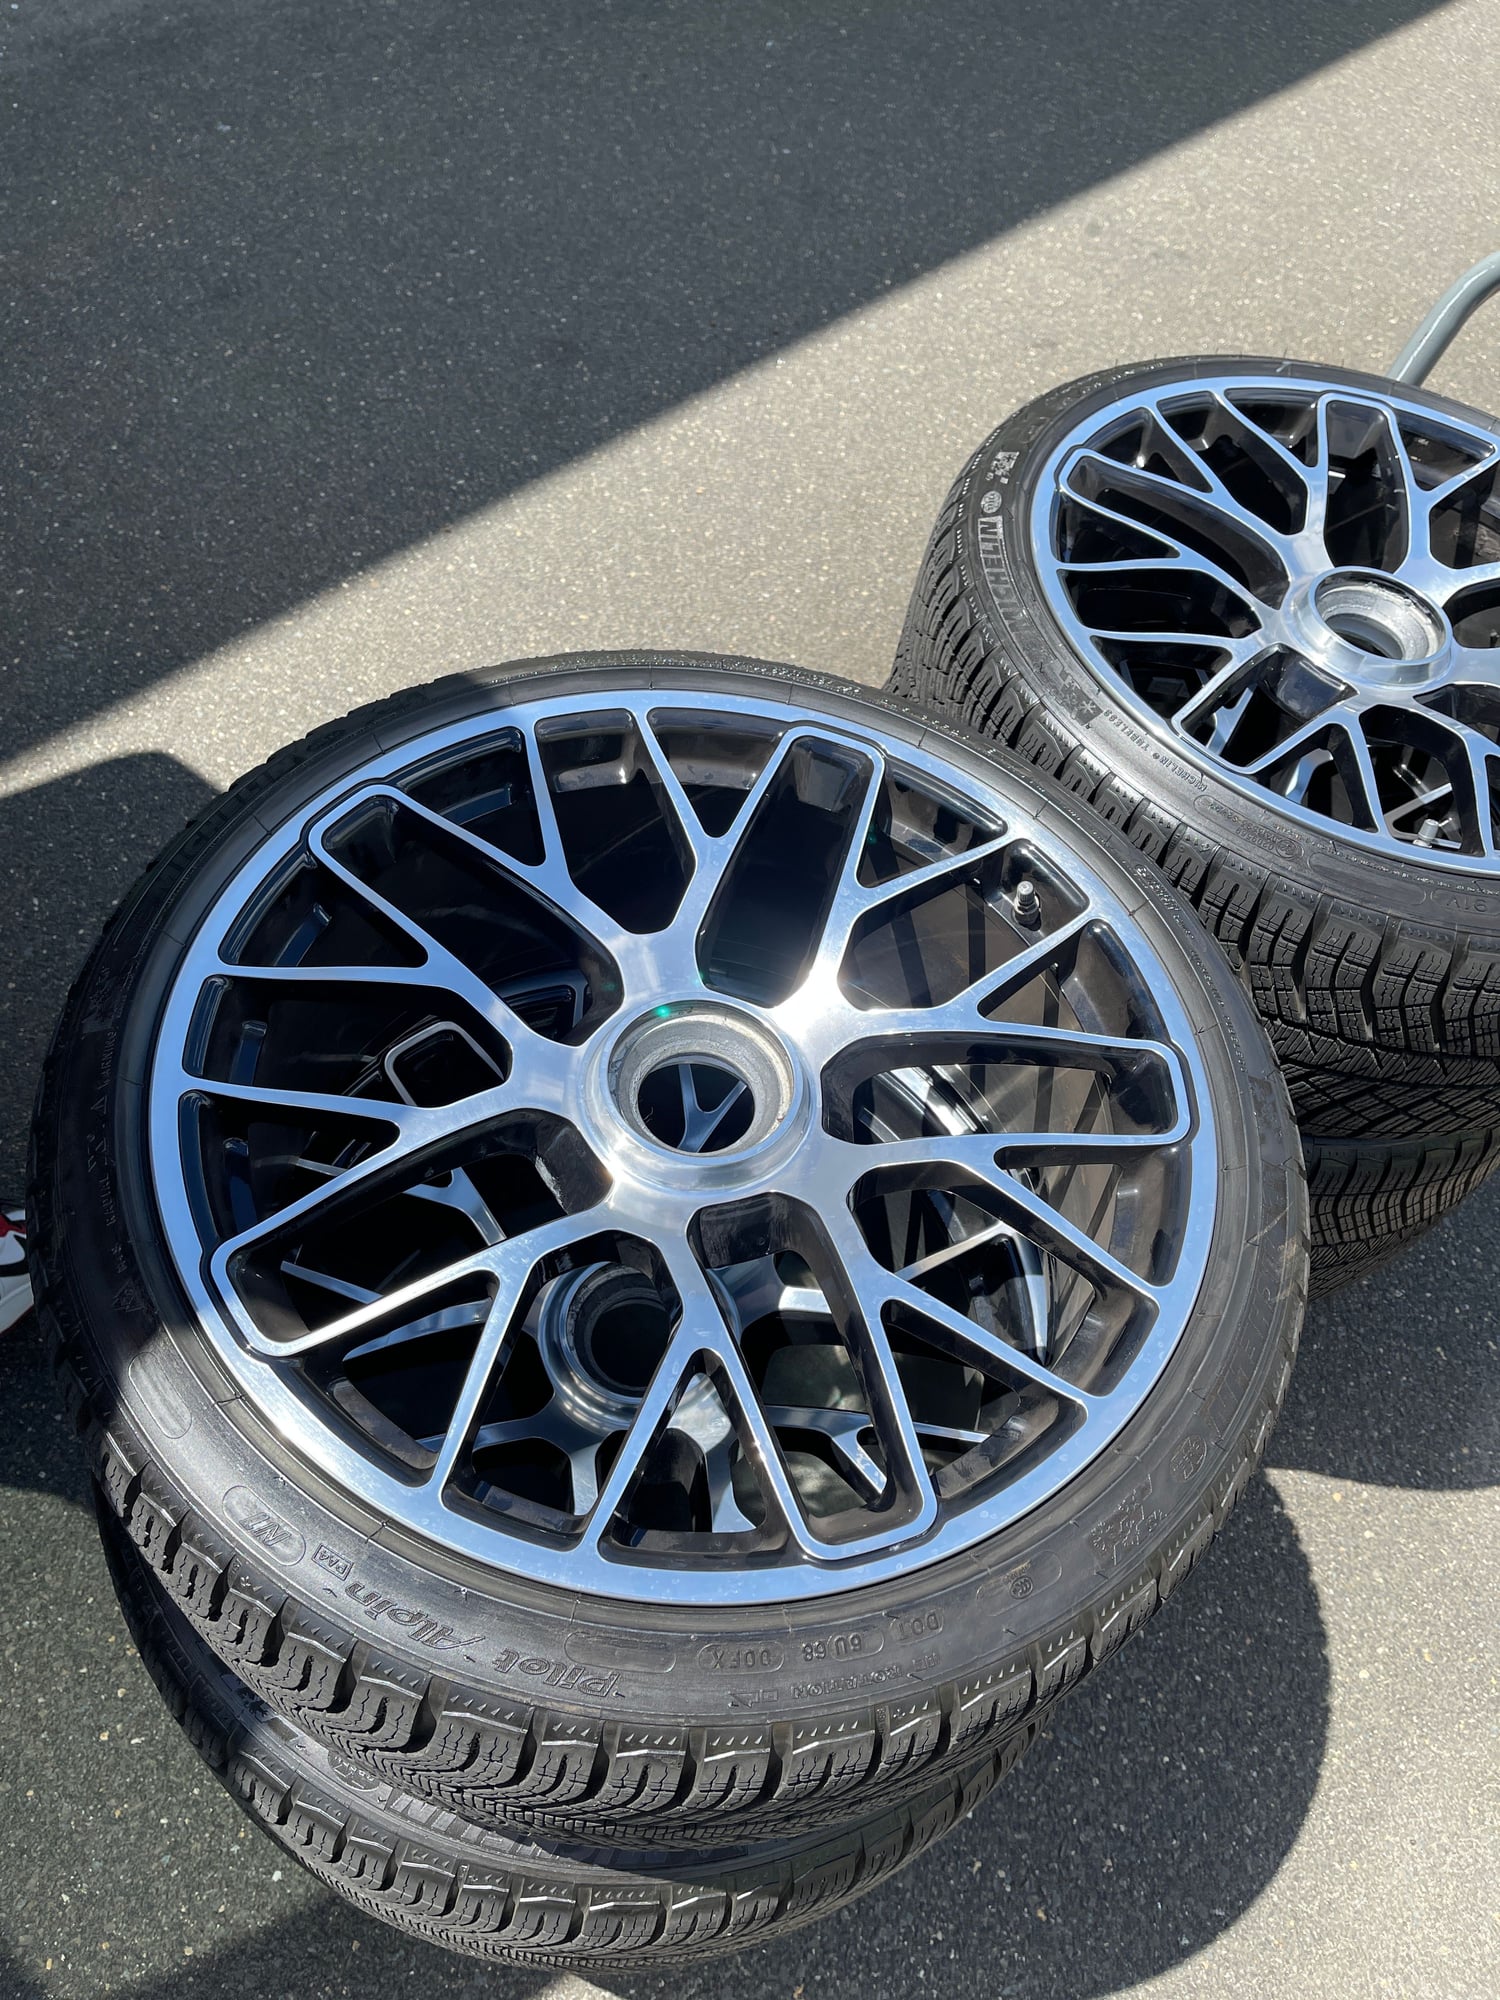 Wheels and Tires/Axles - Porsche OEM 20" Turbo S Wheels and Alpin Winter Tires 991 - Used - 2015 to 2019 Porsche 911 - Ny, NY 10021, United States